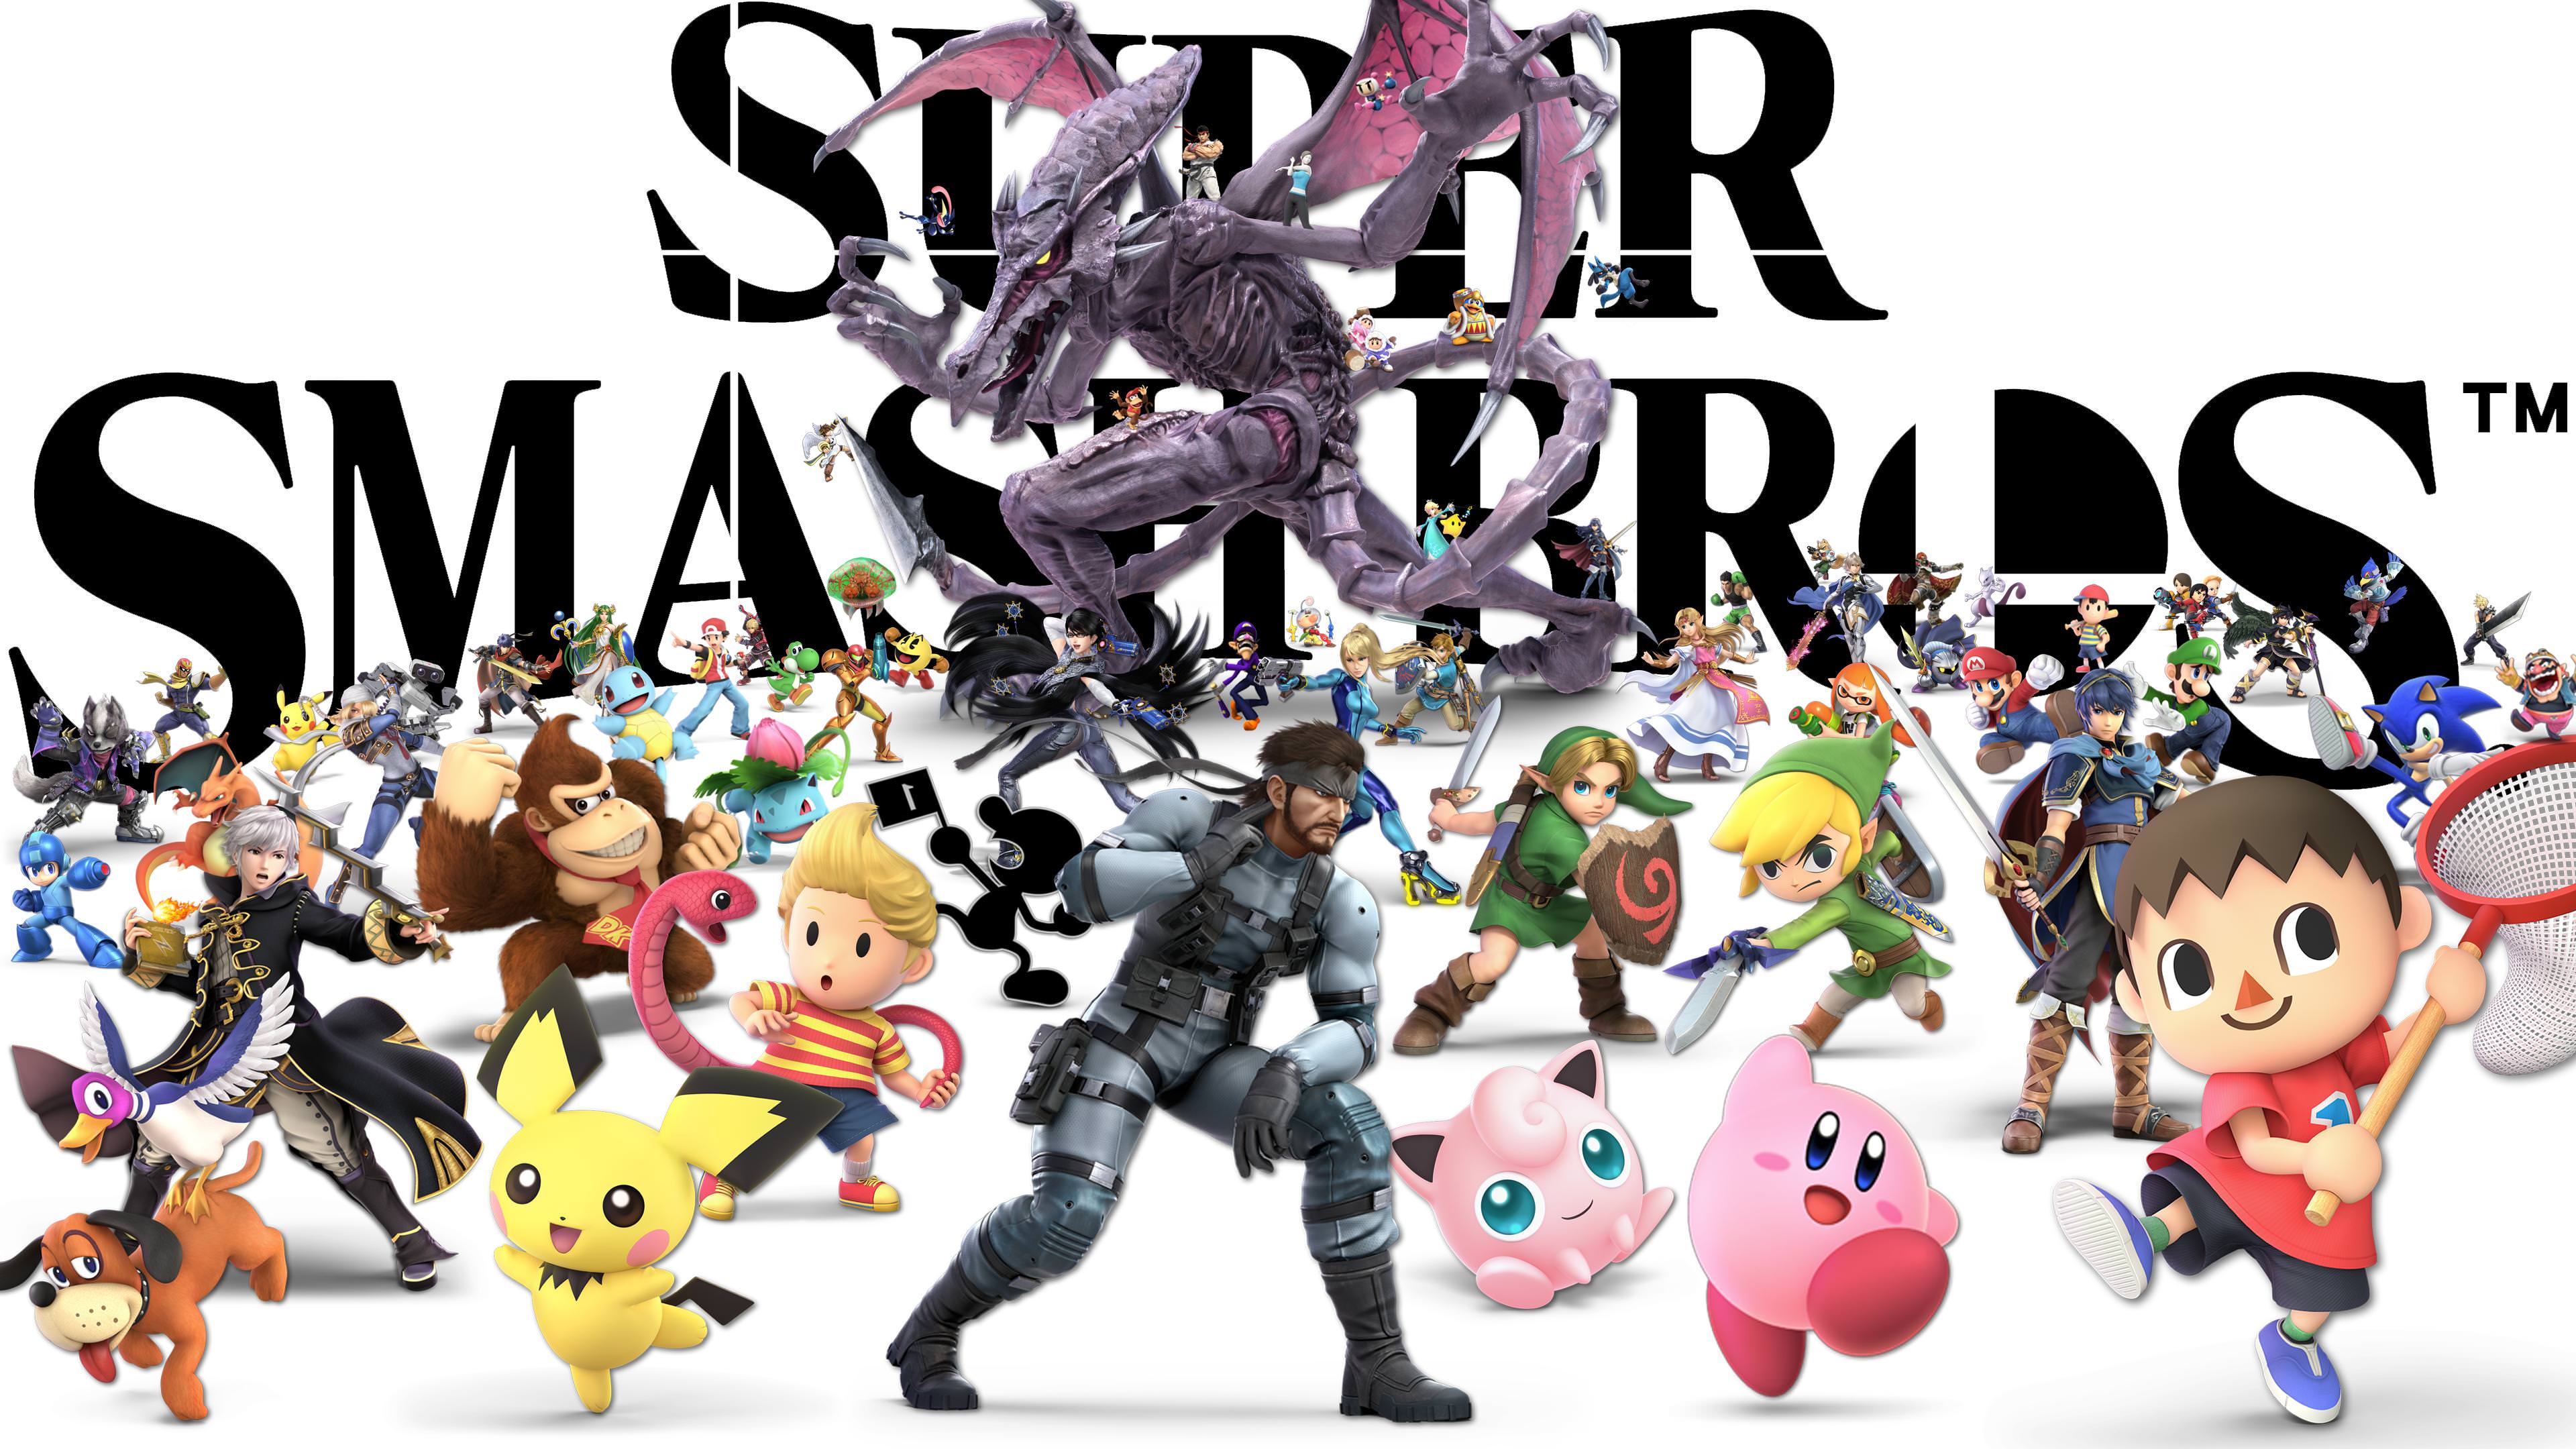 I made a Super Smash Bros. Ultimate Wallpapers featuring all of the